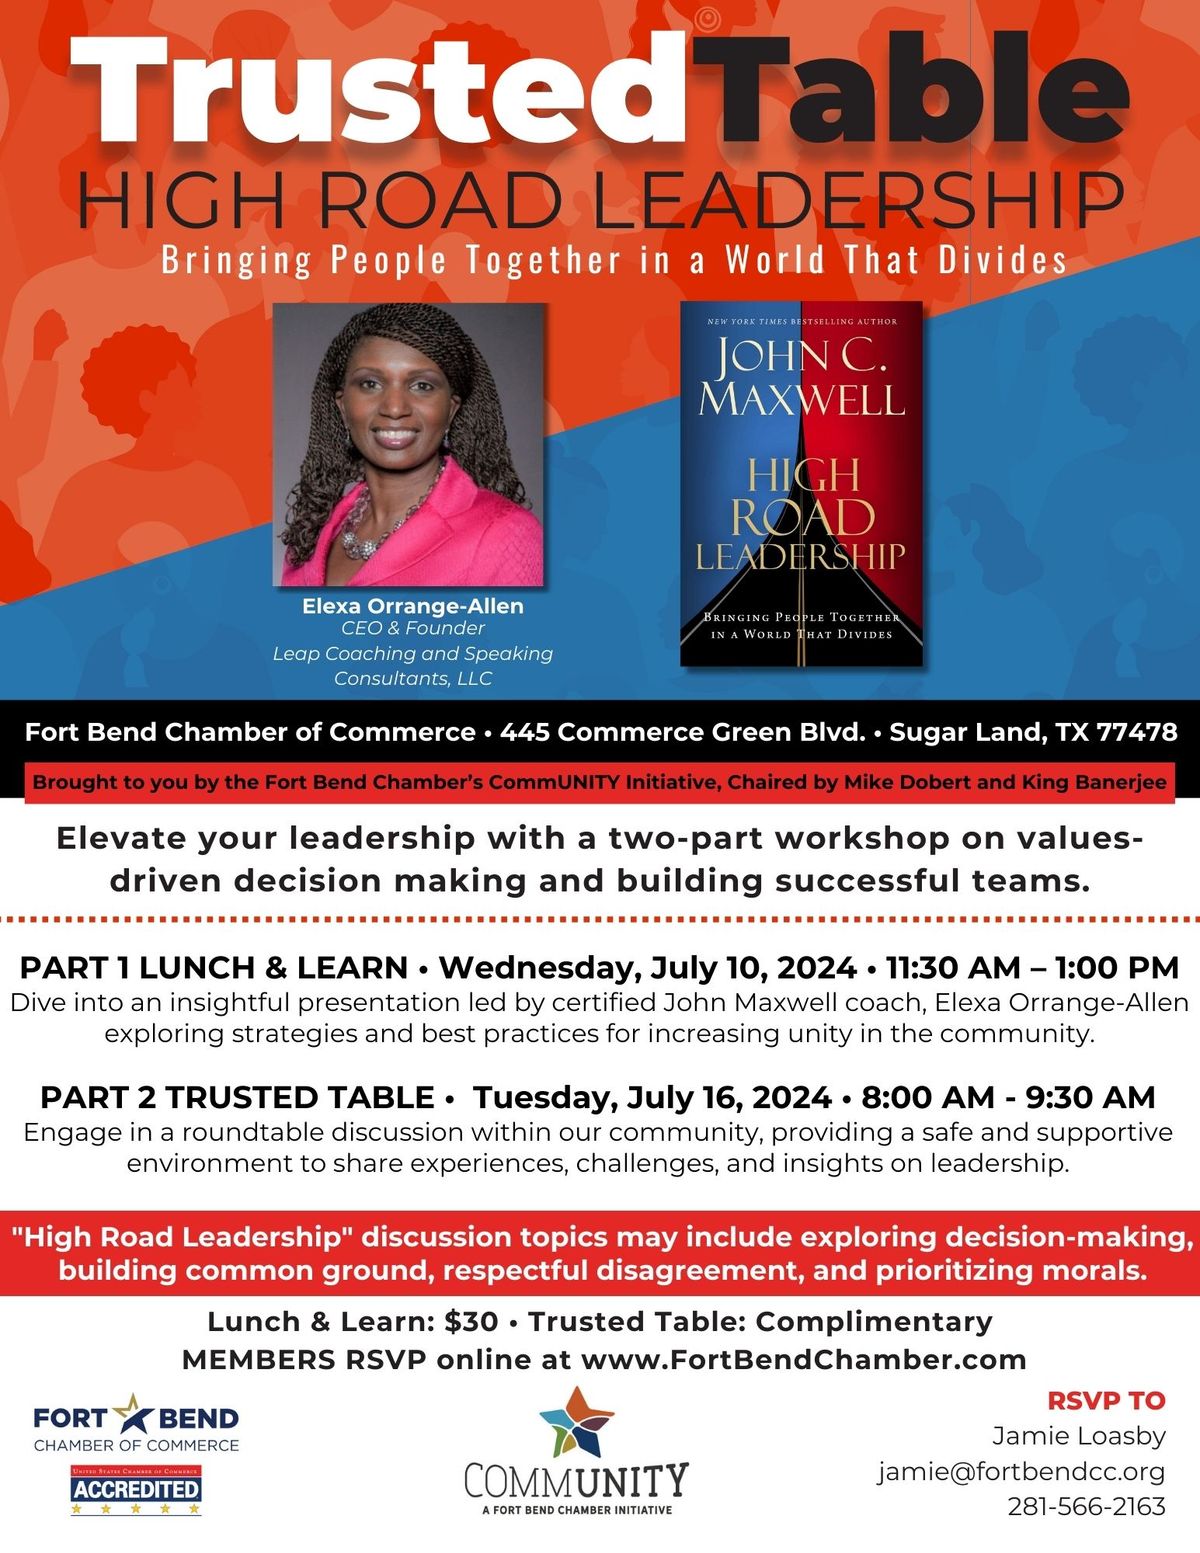 Part 1 - Lunch & Learn: High Road Leadership